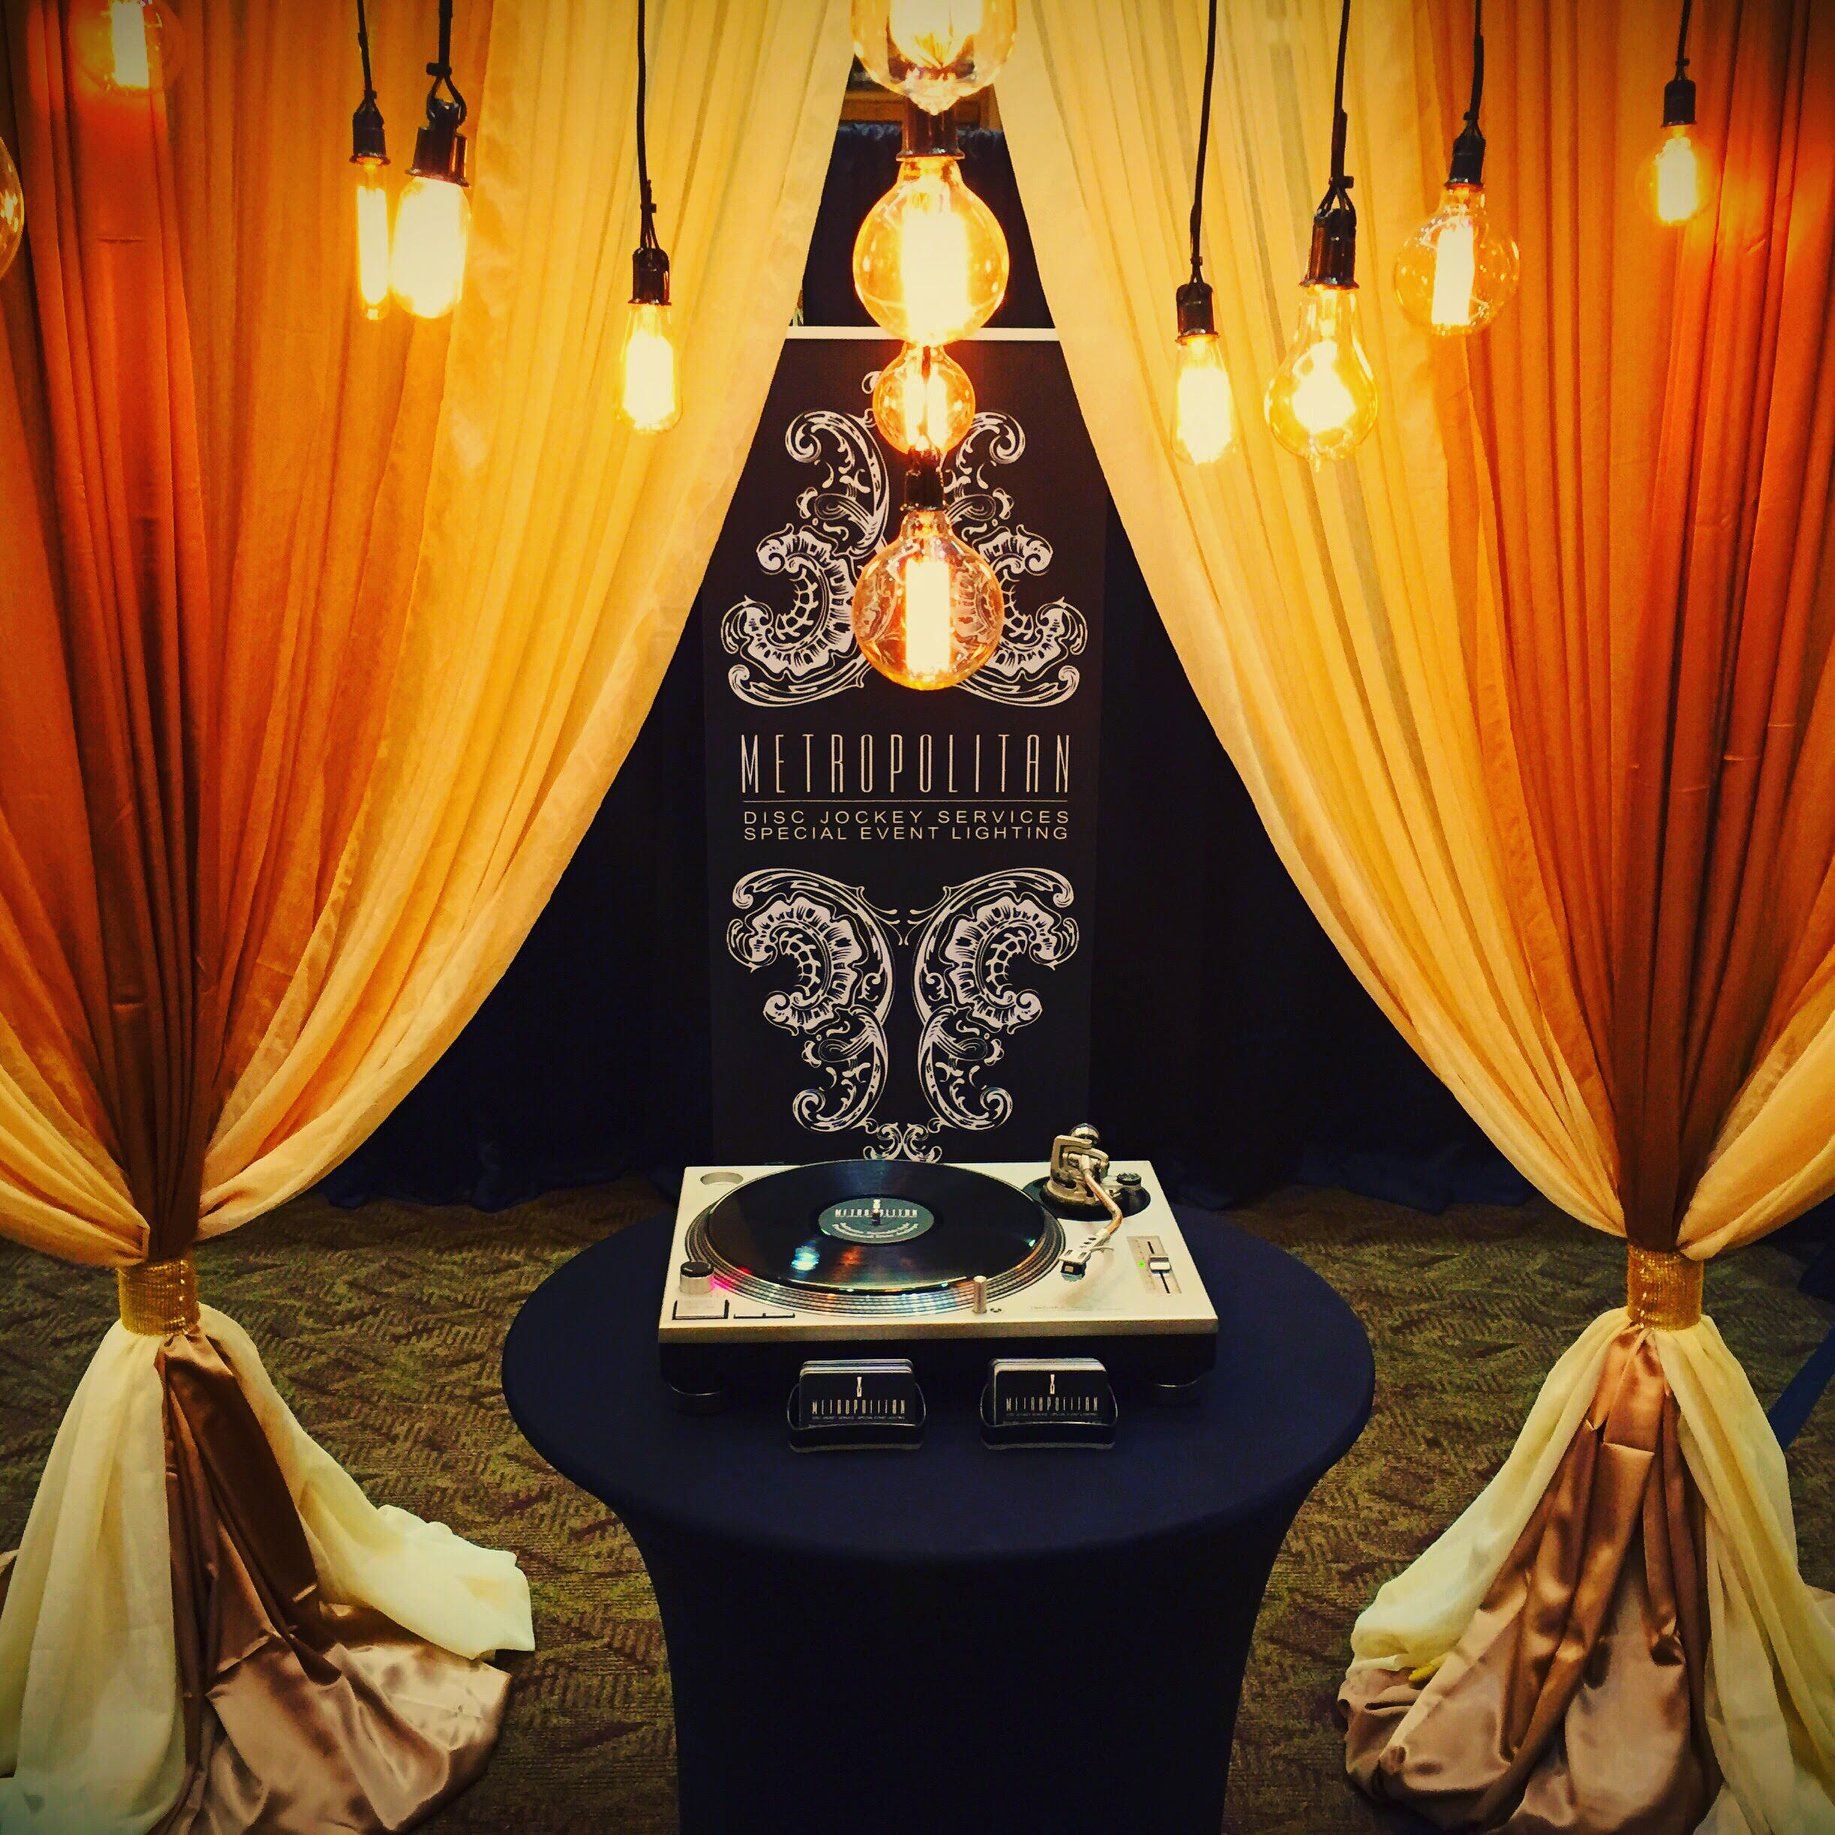 Photo of a wedding photo booth with a vinyl player